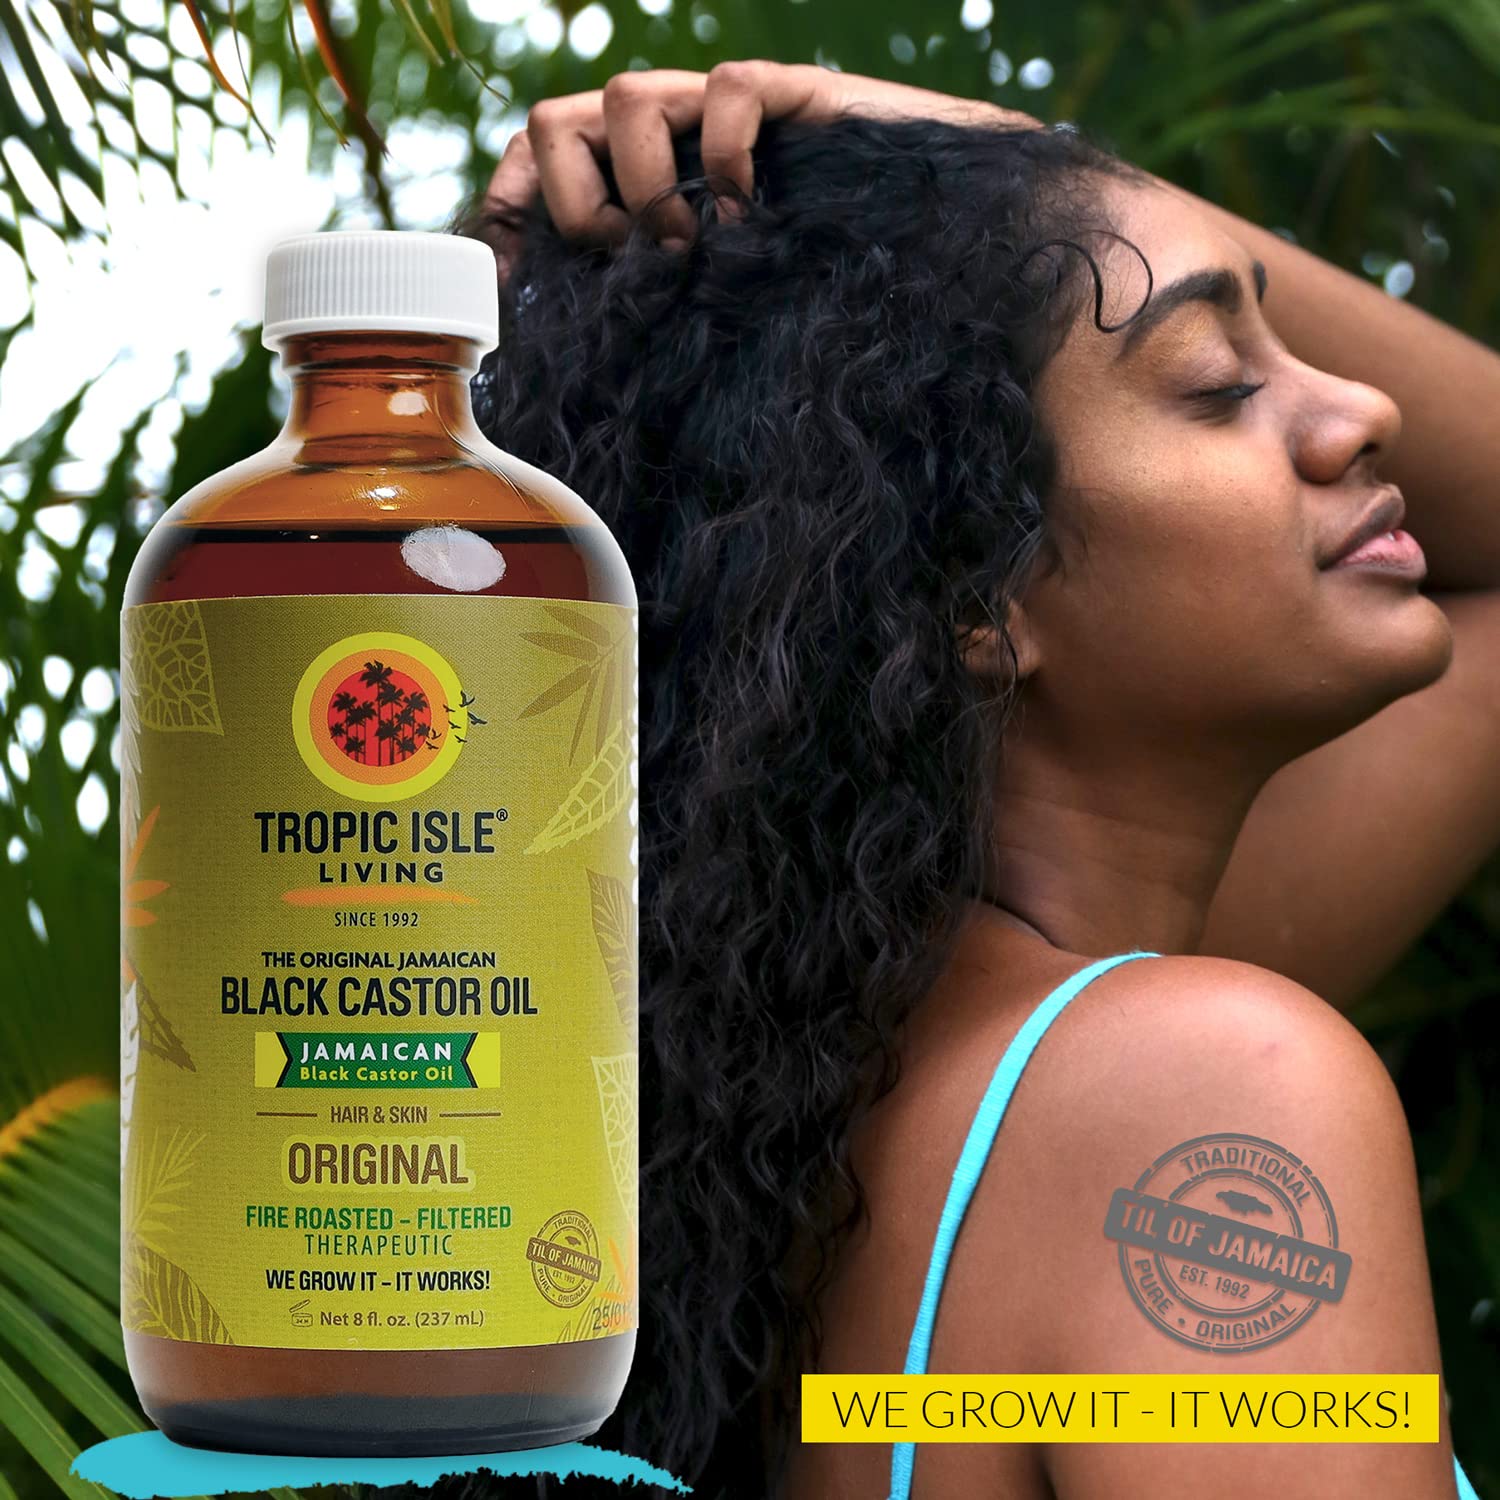 All Natural Jamaican Black Castor Oil | Rich in Vitamin E, Omega Fatty Acids and Minerals | For Hair Growth Oil, Skin Conditioning, Eyebrows & Eyelashes, Scalp and Nail Care | Grow, Strengthen, Moisture & Repair - Glass Bottle 8oz (Pack of 2)